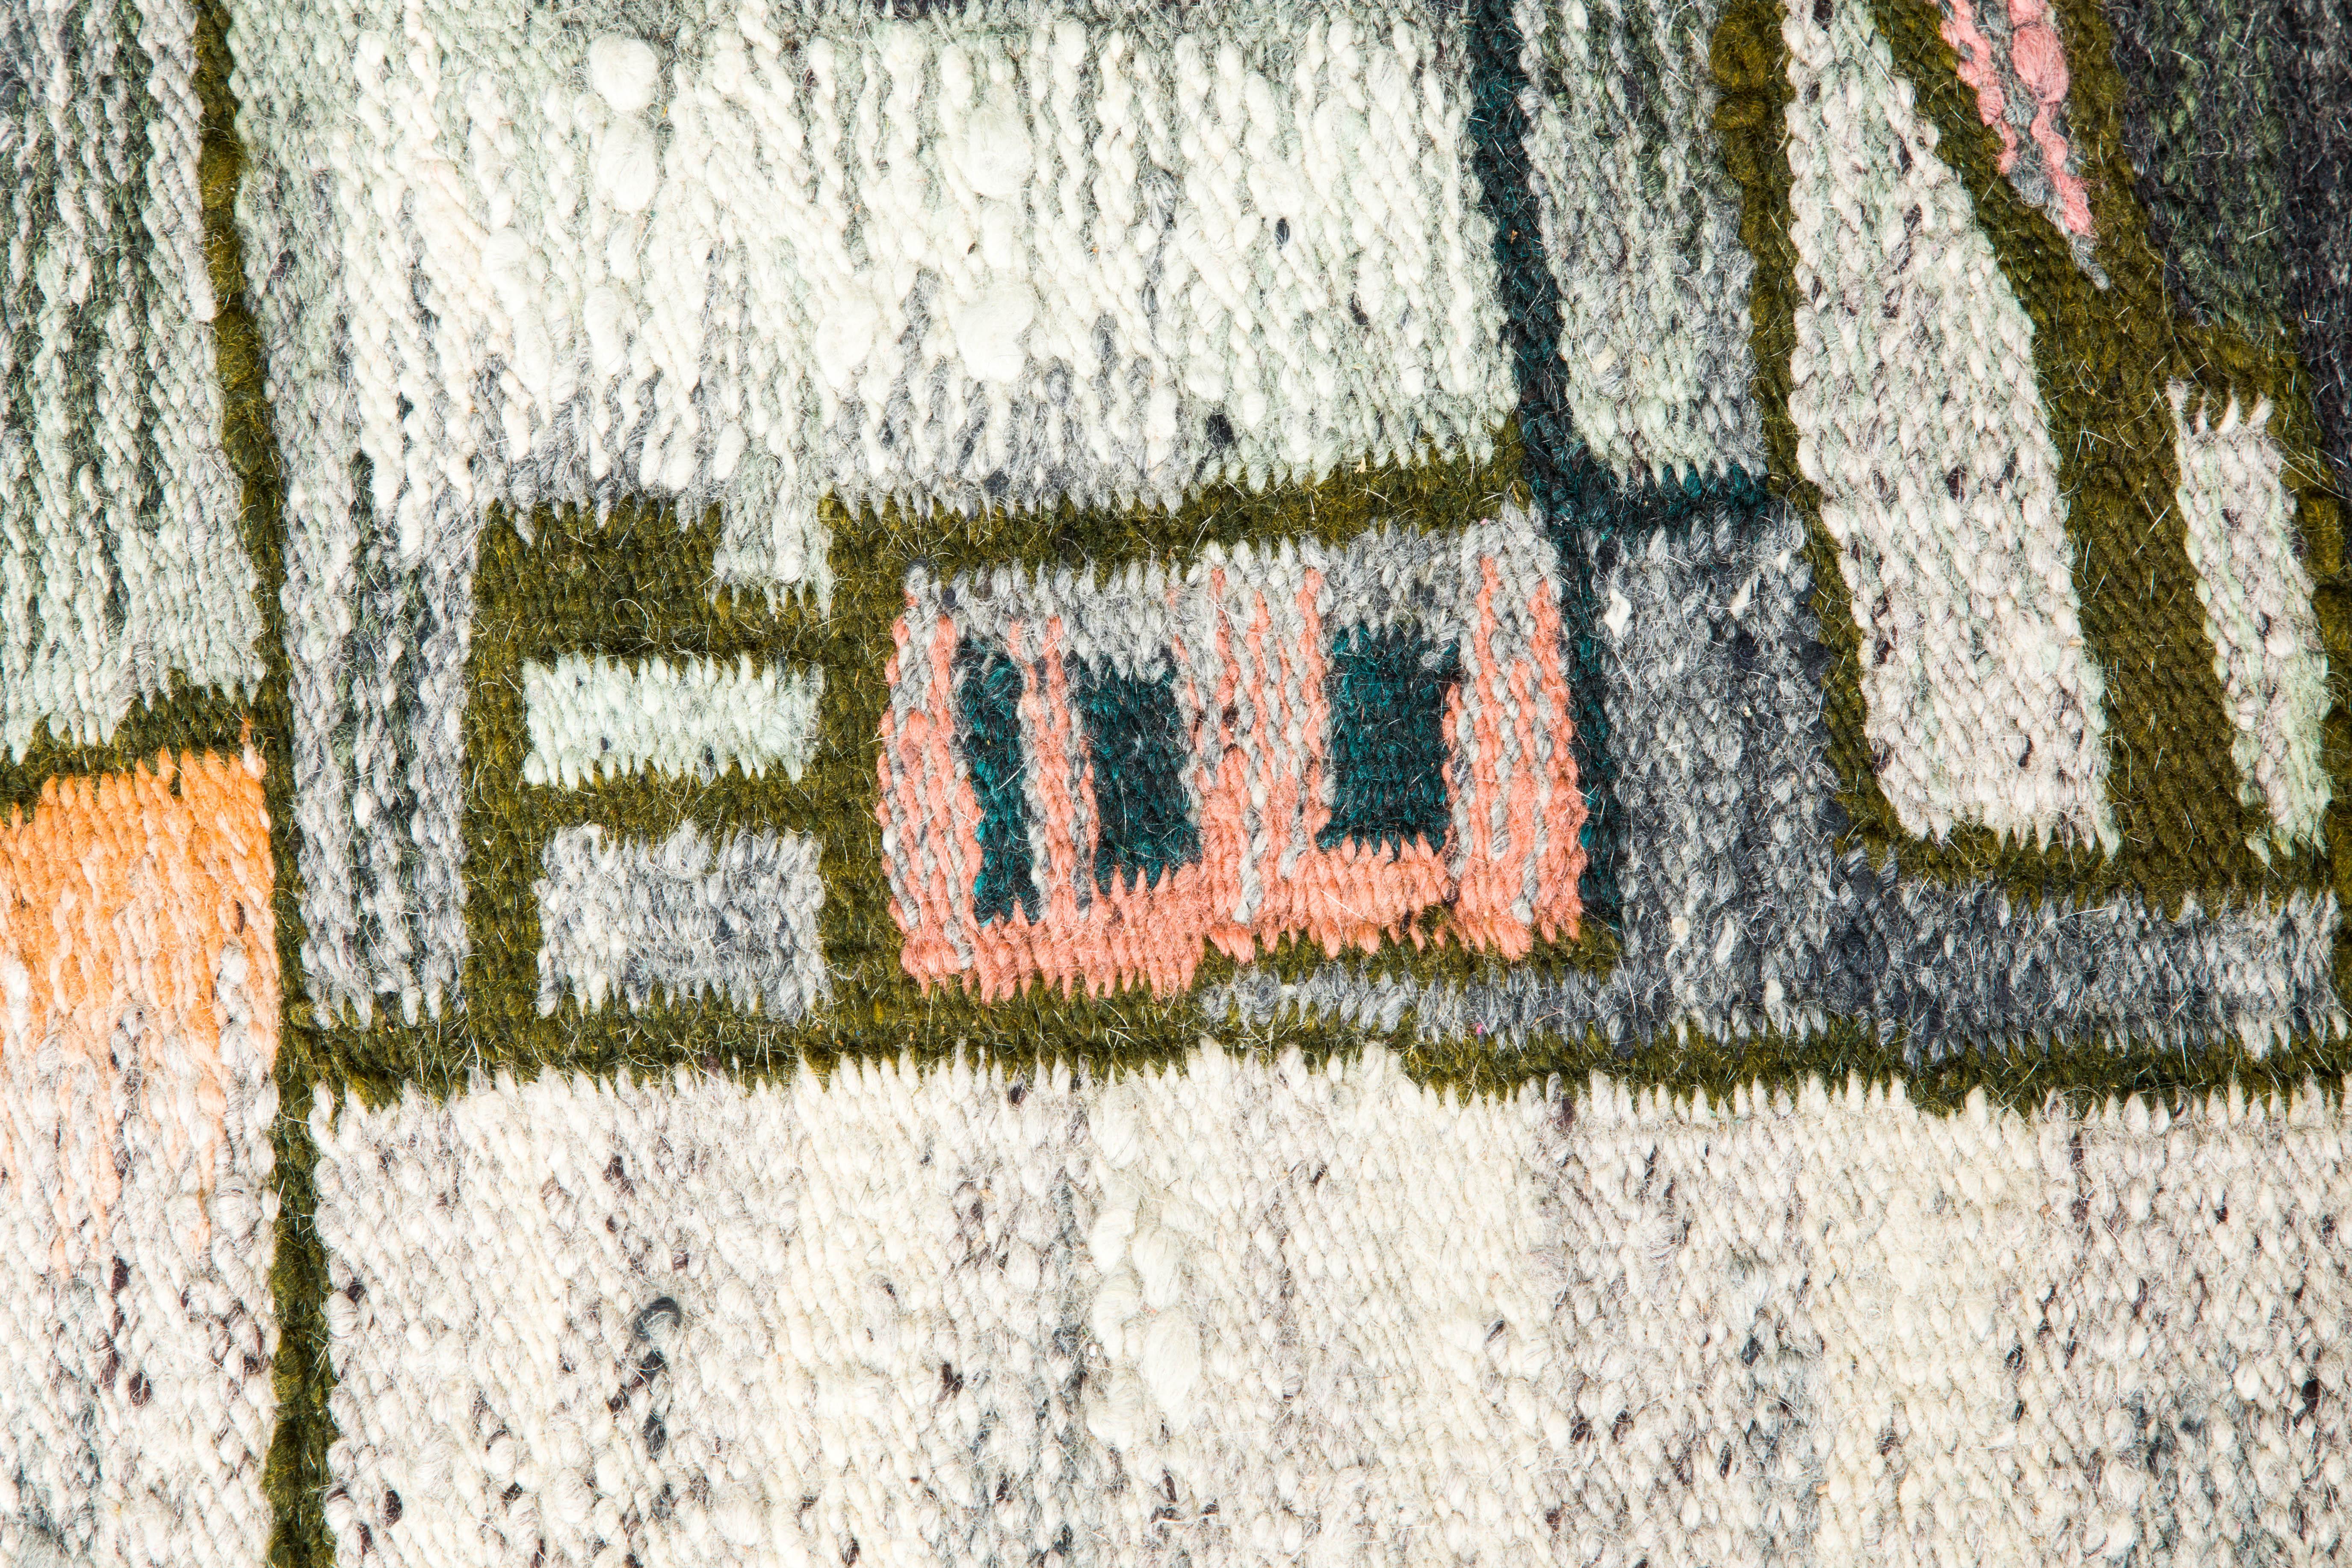 'A White Stream' Wool Tapestry or Rug by H. Sulkowska for Cepelia c 1960, Signed For Sale 4